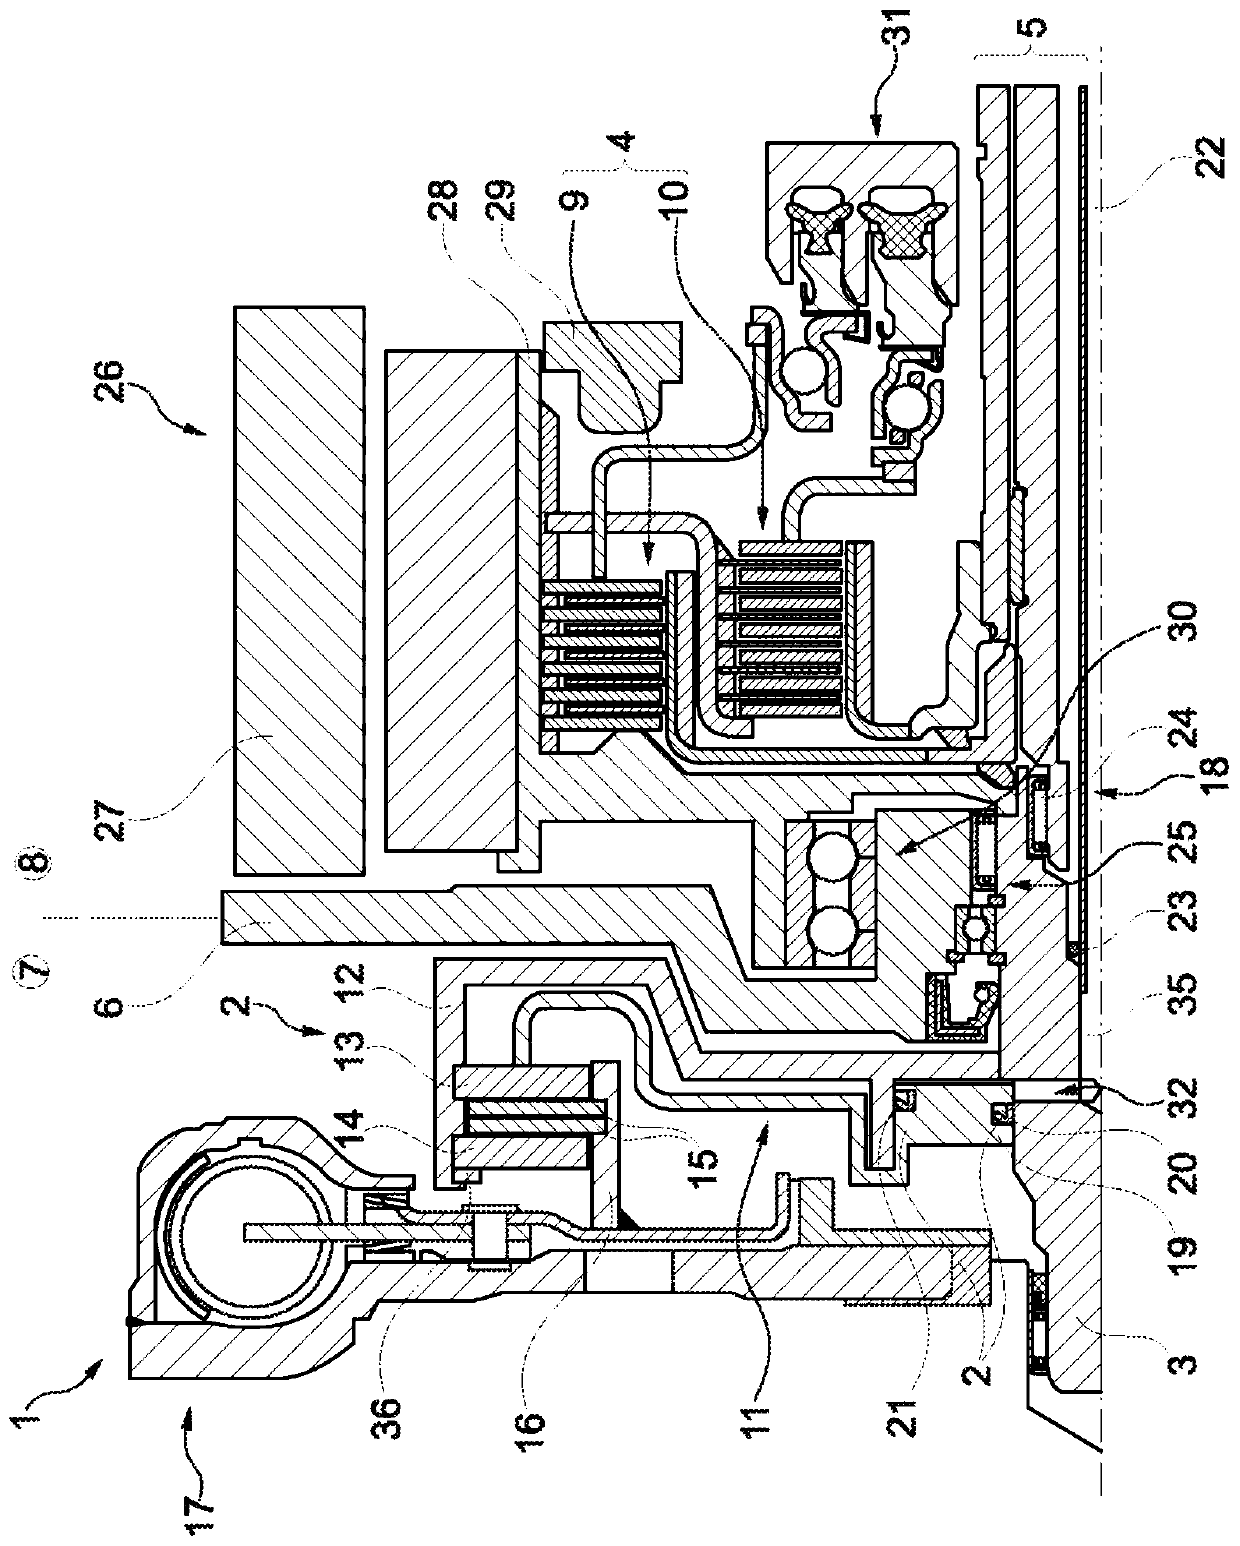 Hybrid module with separating clutch outside of the housing